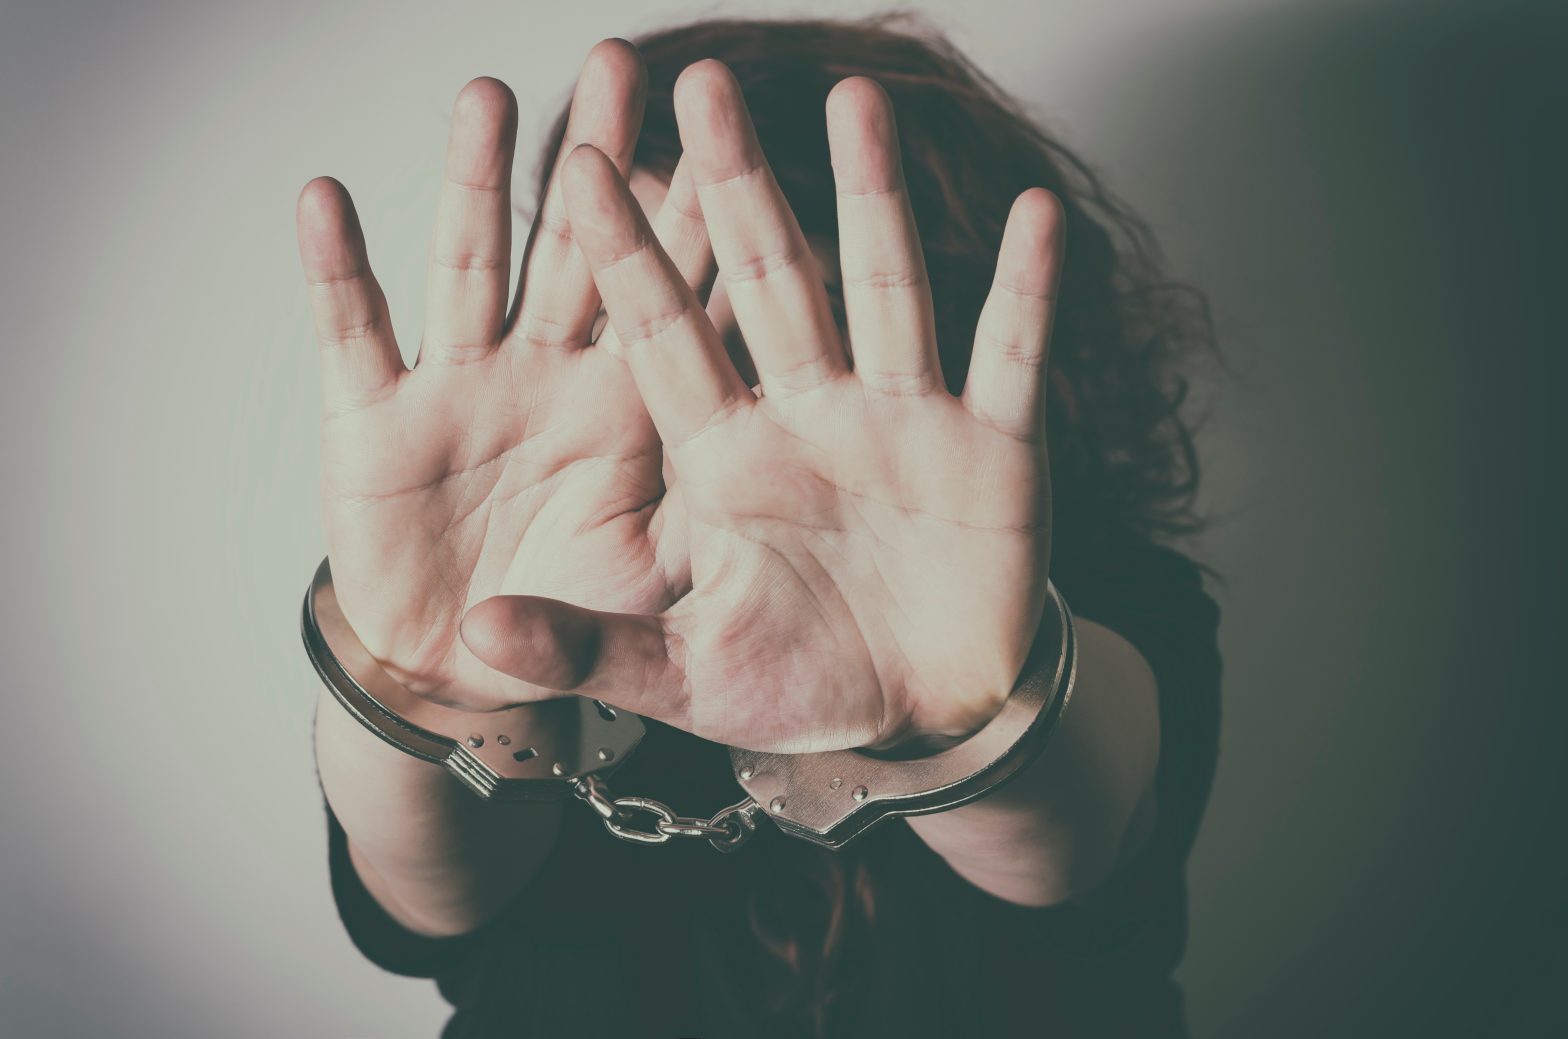 Woman with handcuffs hiding face with her hands.